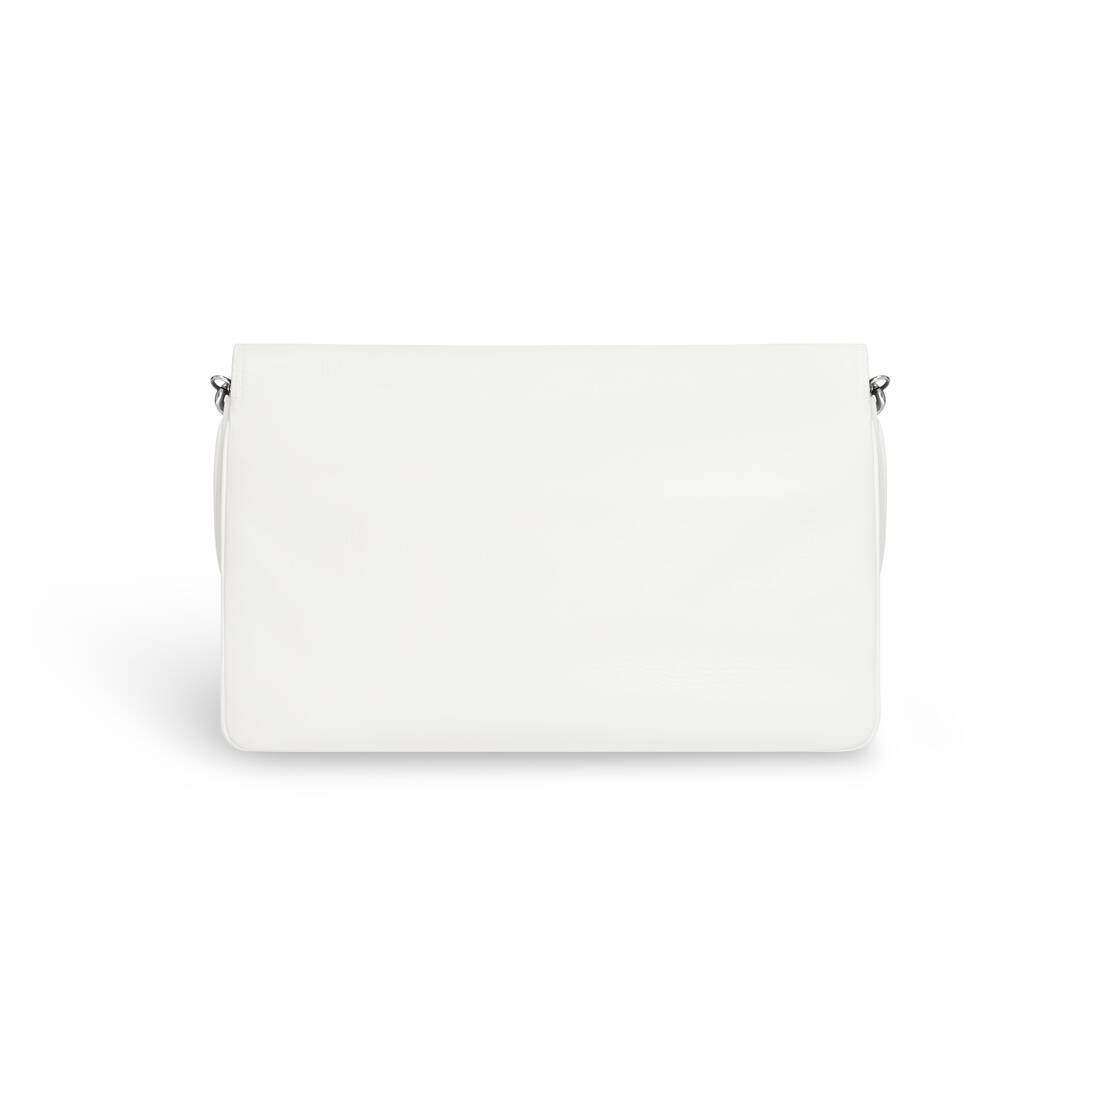 Women's Bb Soft Large Flap Bag in Optic White